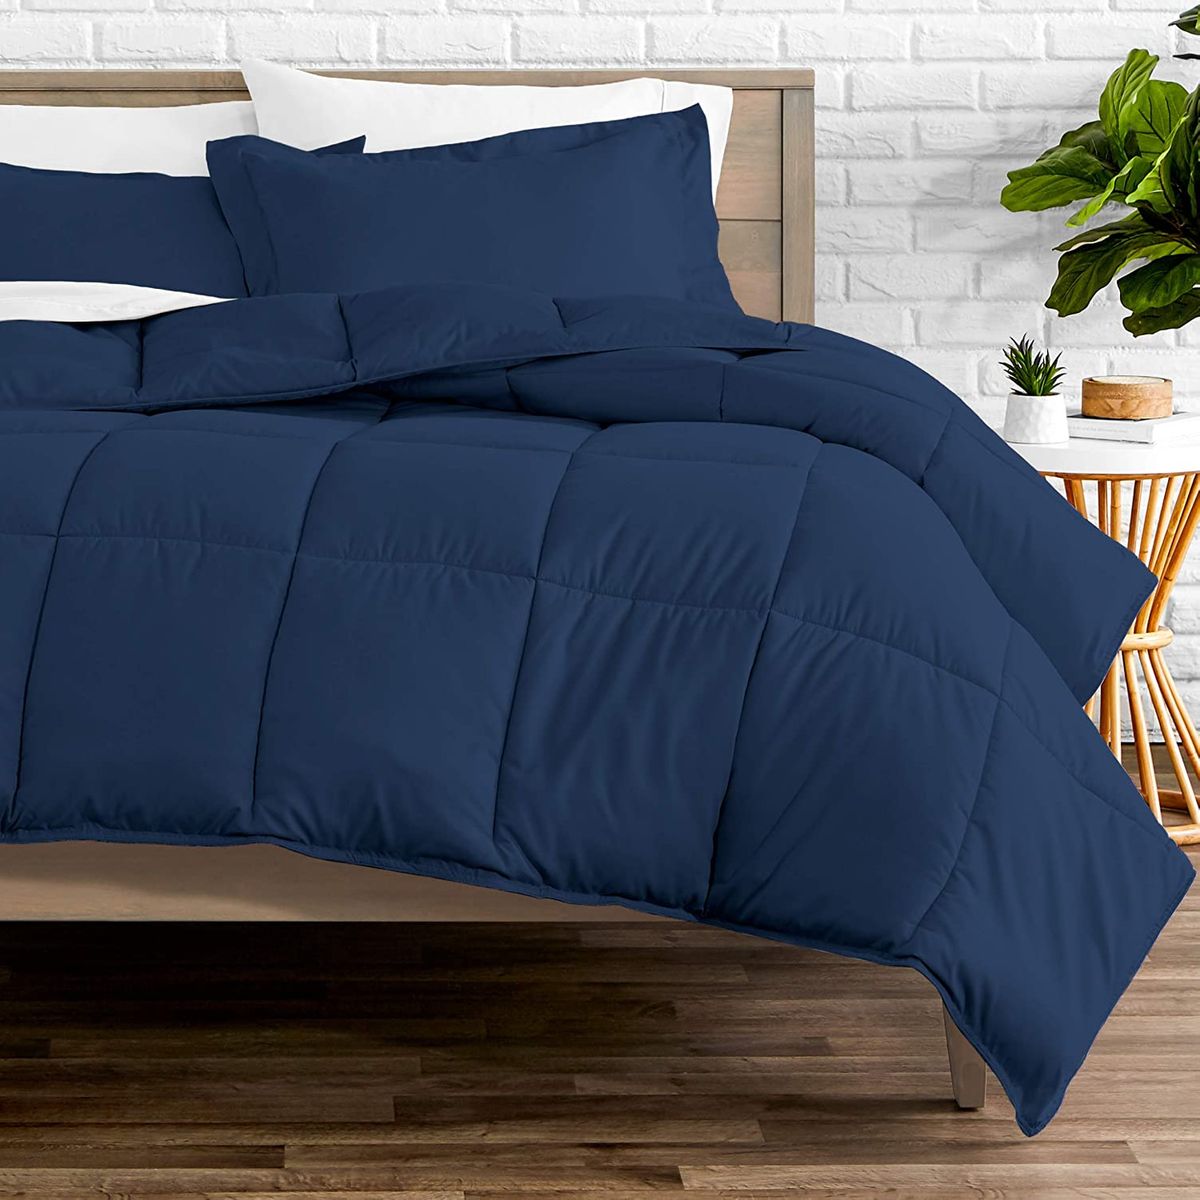 17 Best Comforters On 2021 The, How To Put A Super King Duvet Cover On Queen Comforter Sets